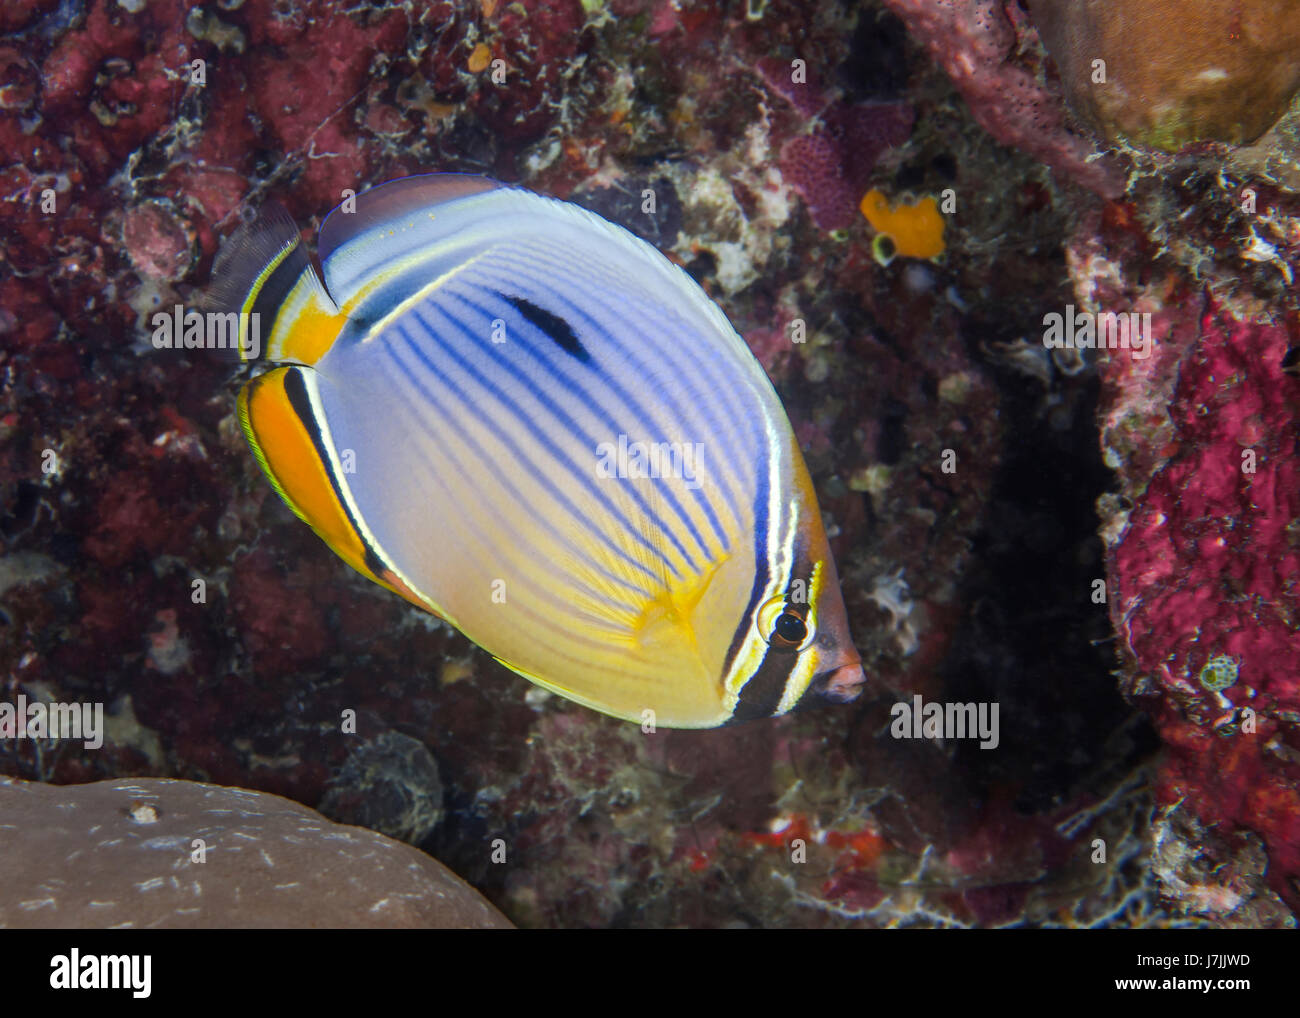 Close-up image of yellow and blue melon butterflyfish against contrasting red coral reef background. South Male Atoll, Maldives. Stock Photo